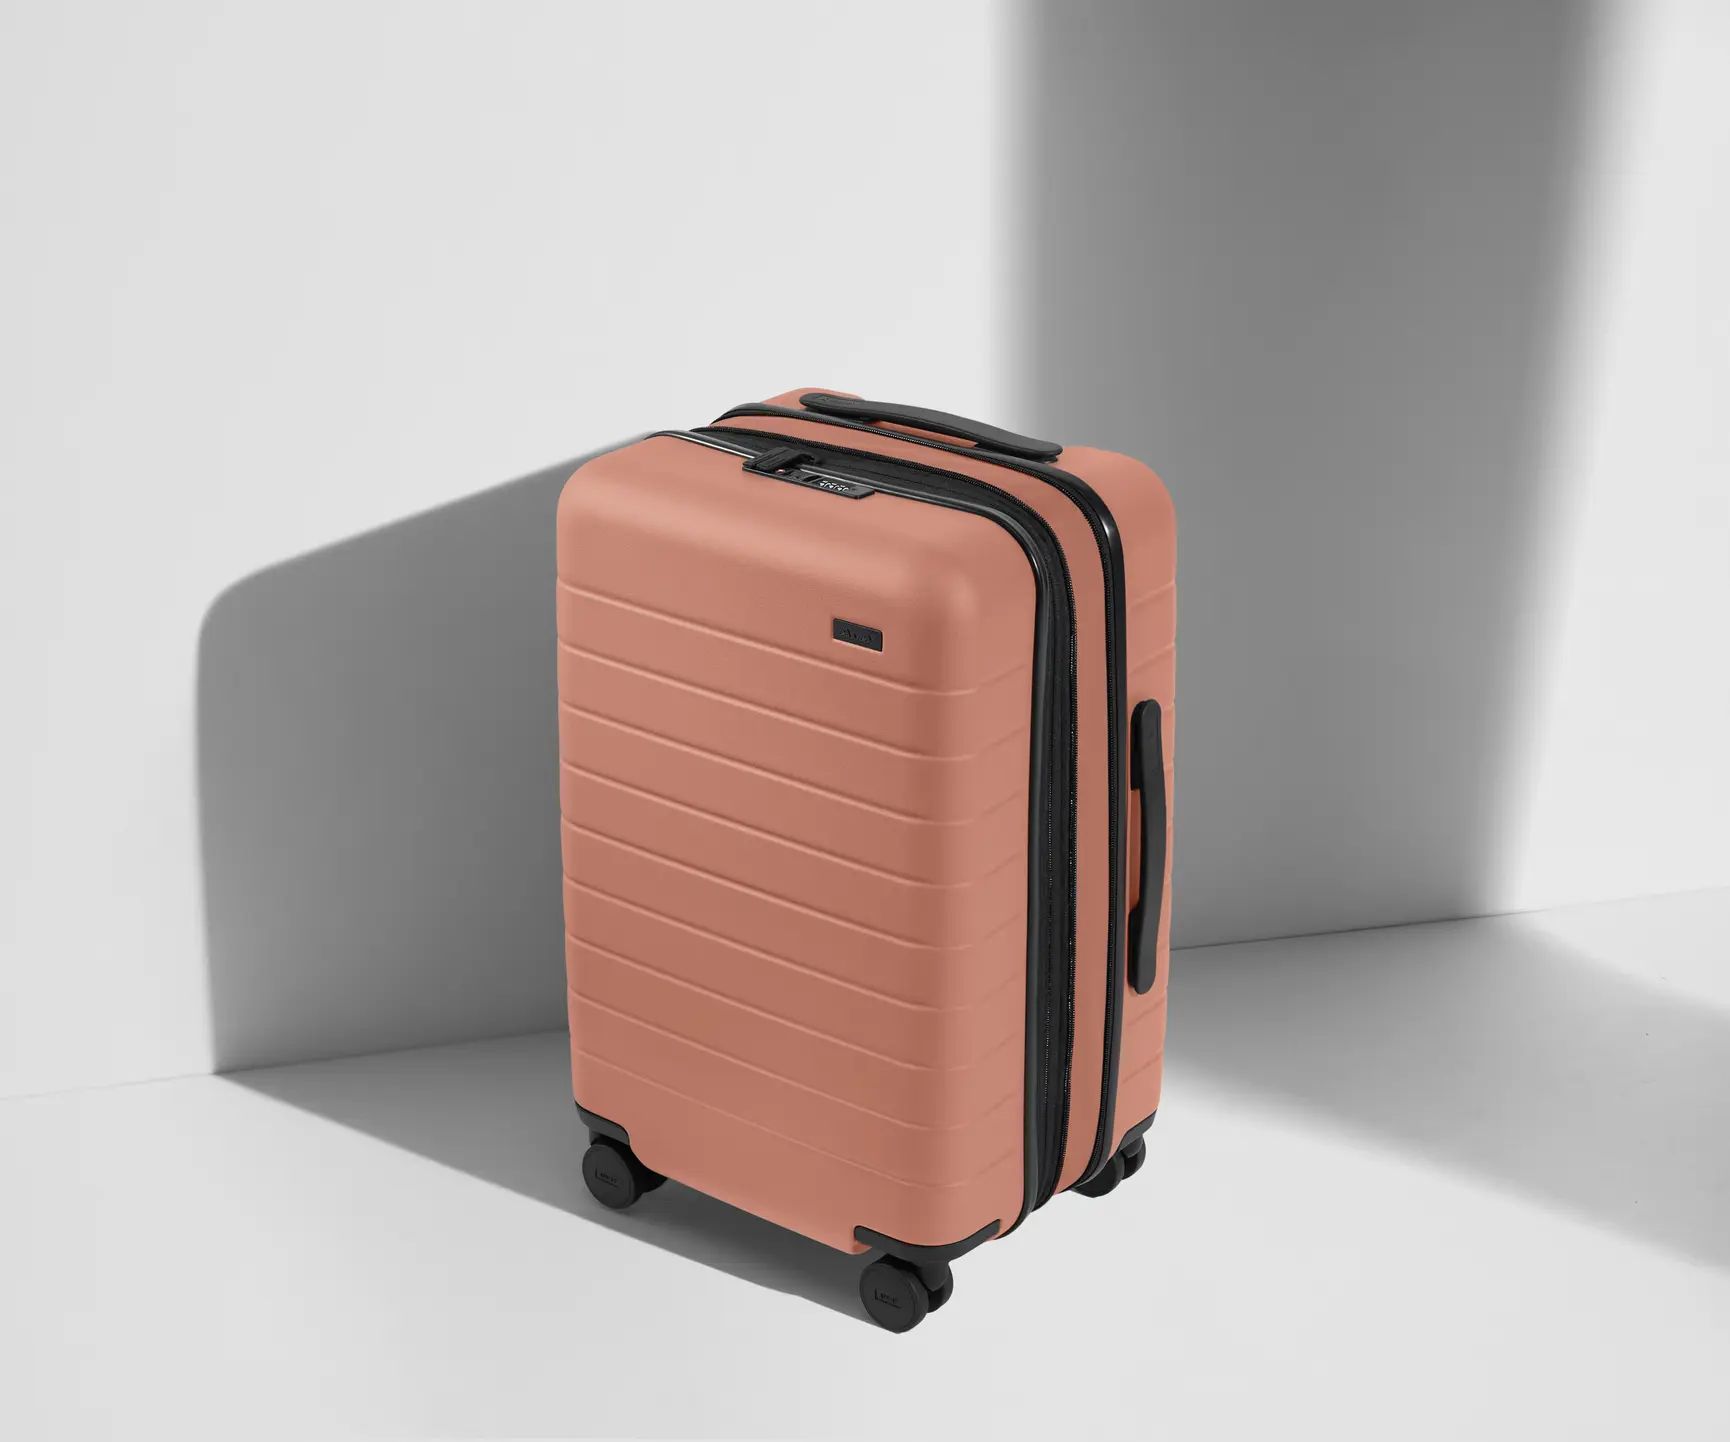 The Carry-On Flex | Away